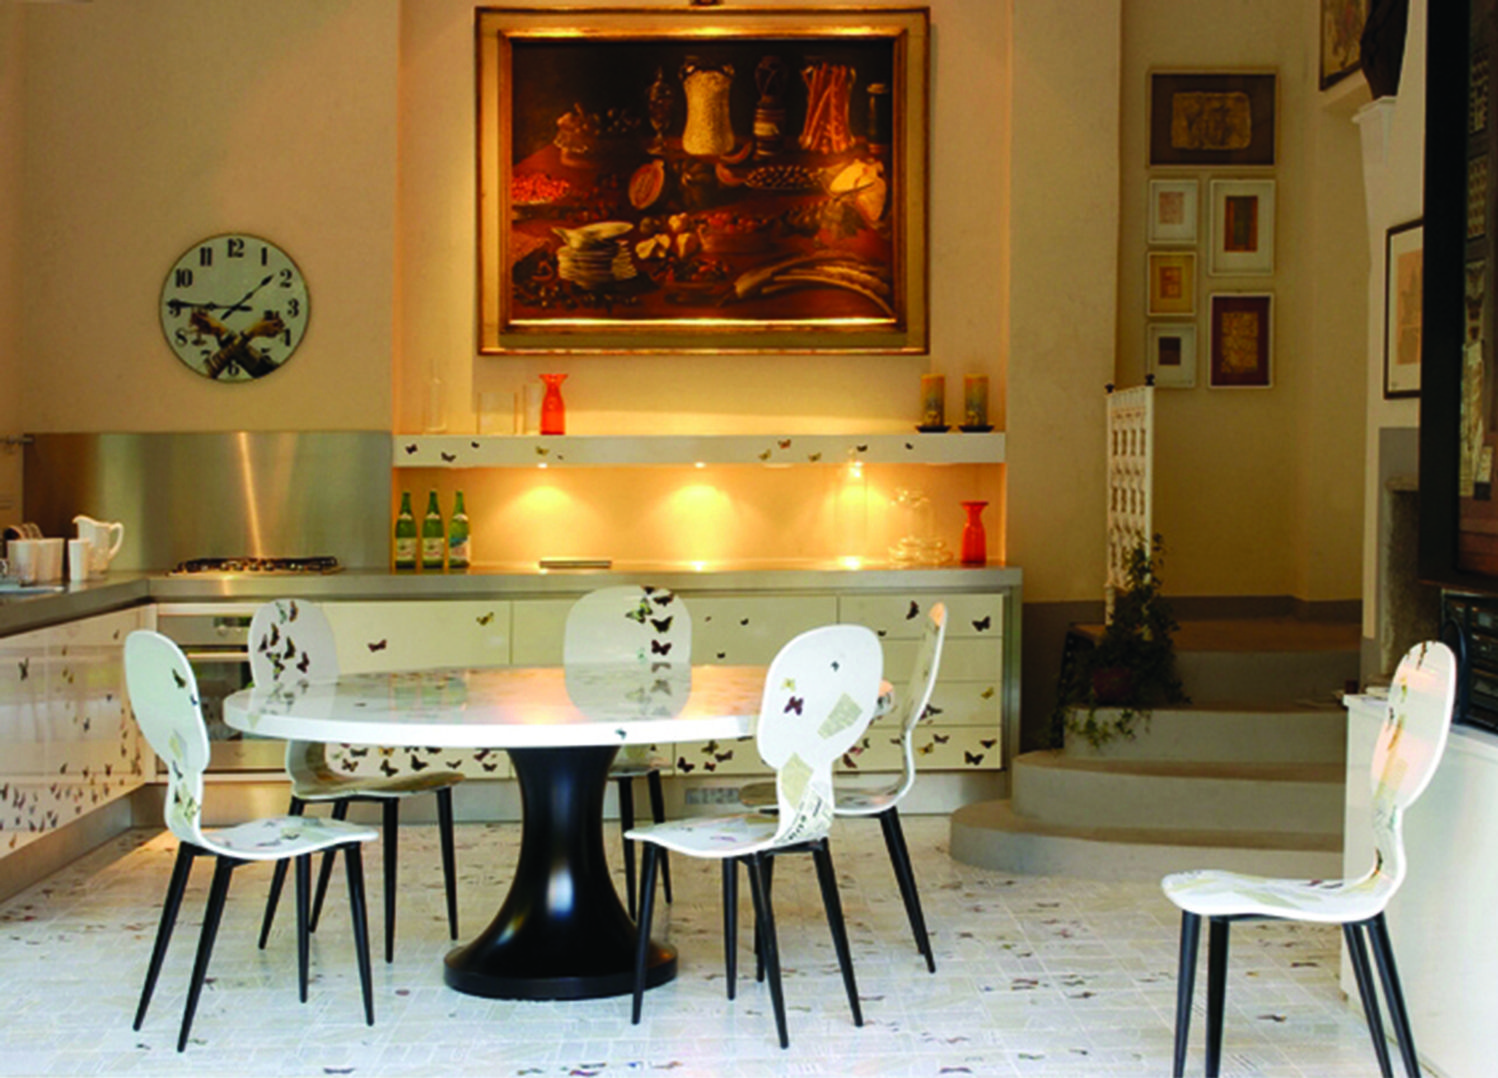 Strato_design_bespoke kitchen project in collaboration with Fornasetti_17